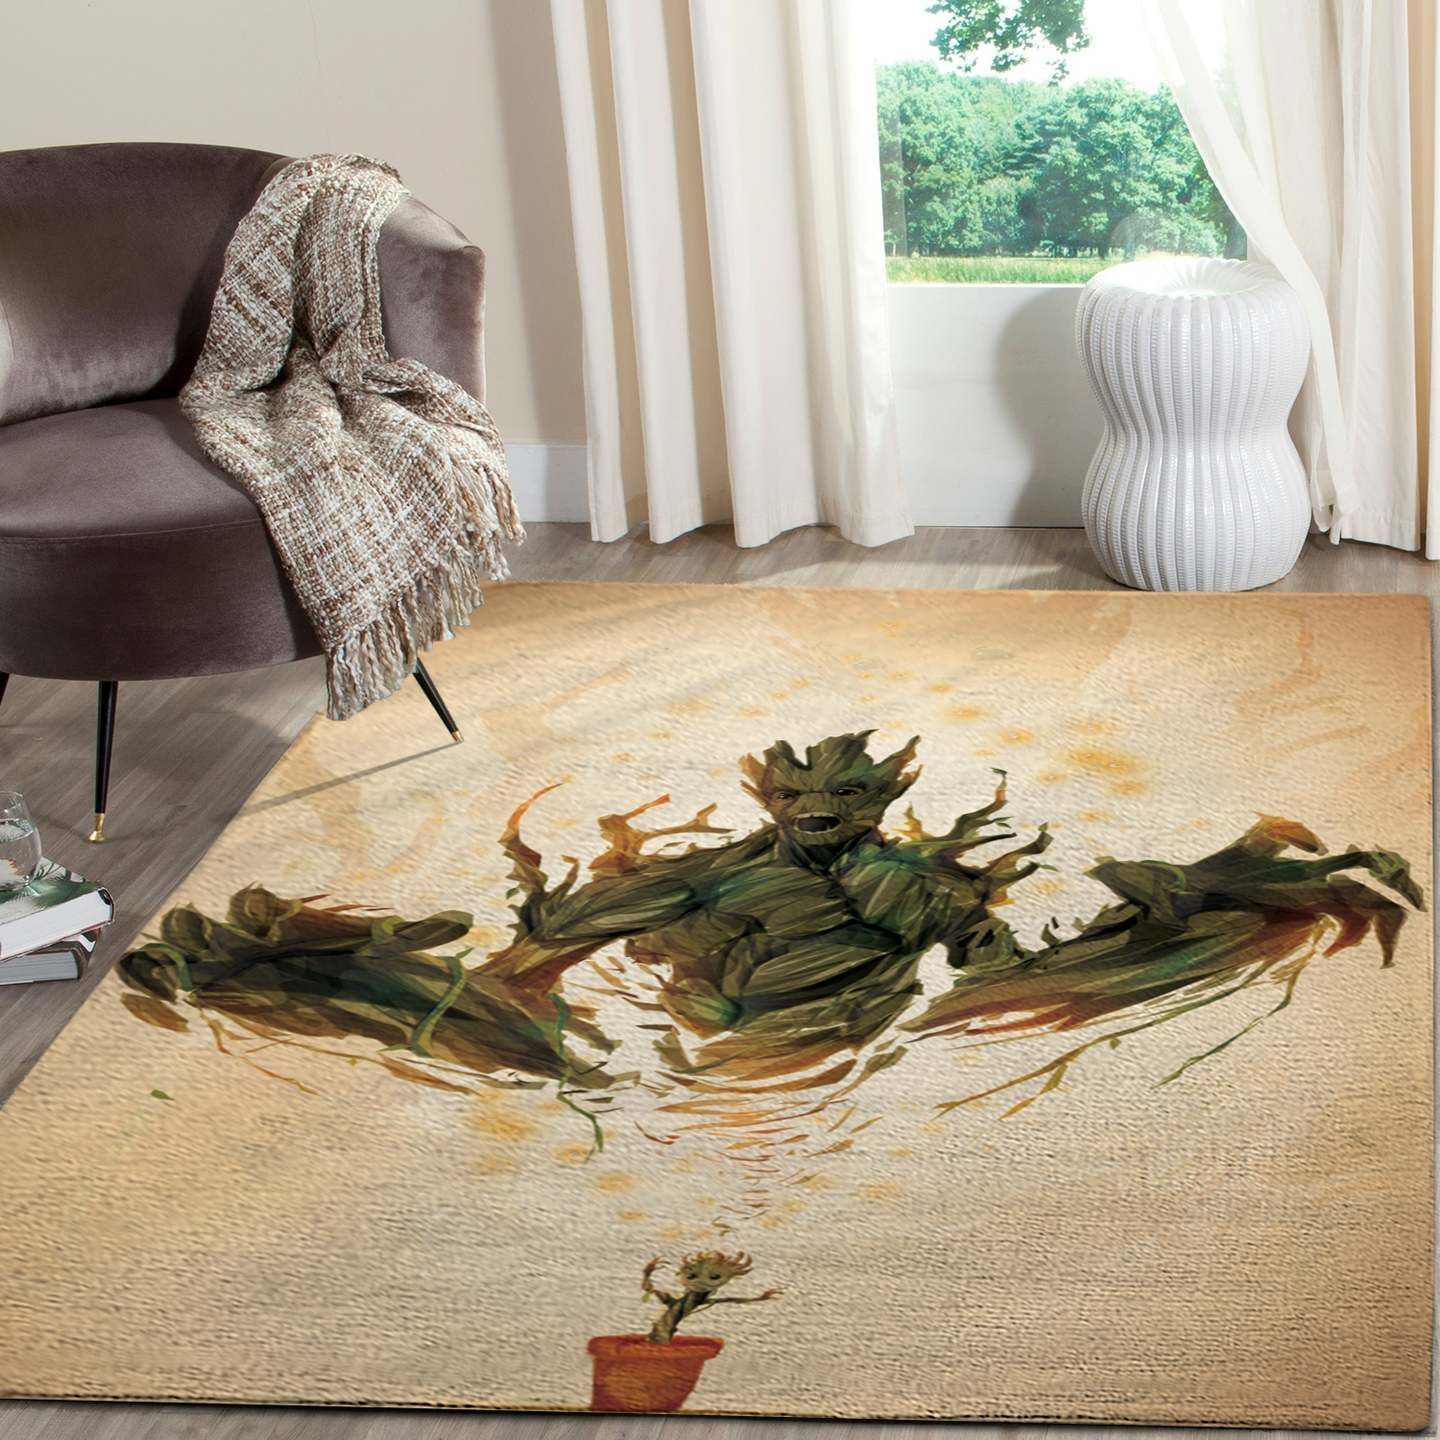 BABY GROOT AREA RUGS LIVING ROOM CARPET CHRISTMAS GIFT FLOOR DECOR THE US DECOR 180222